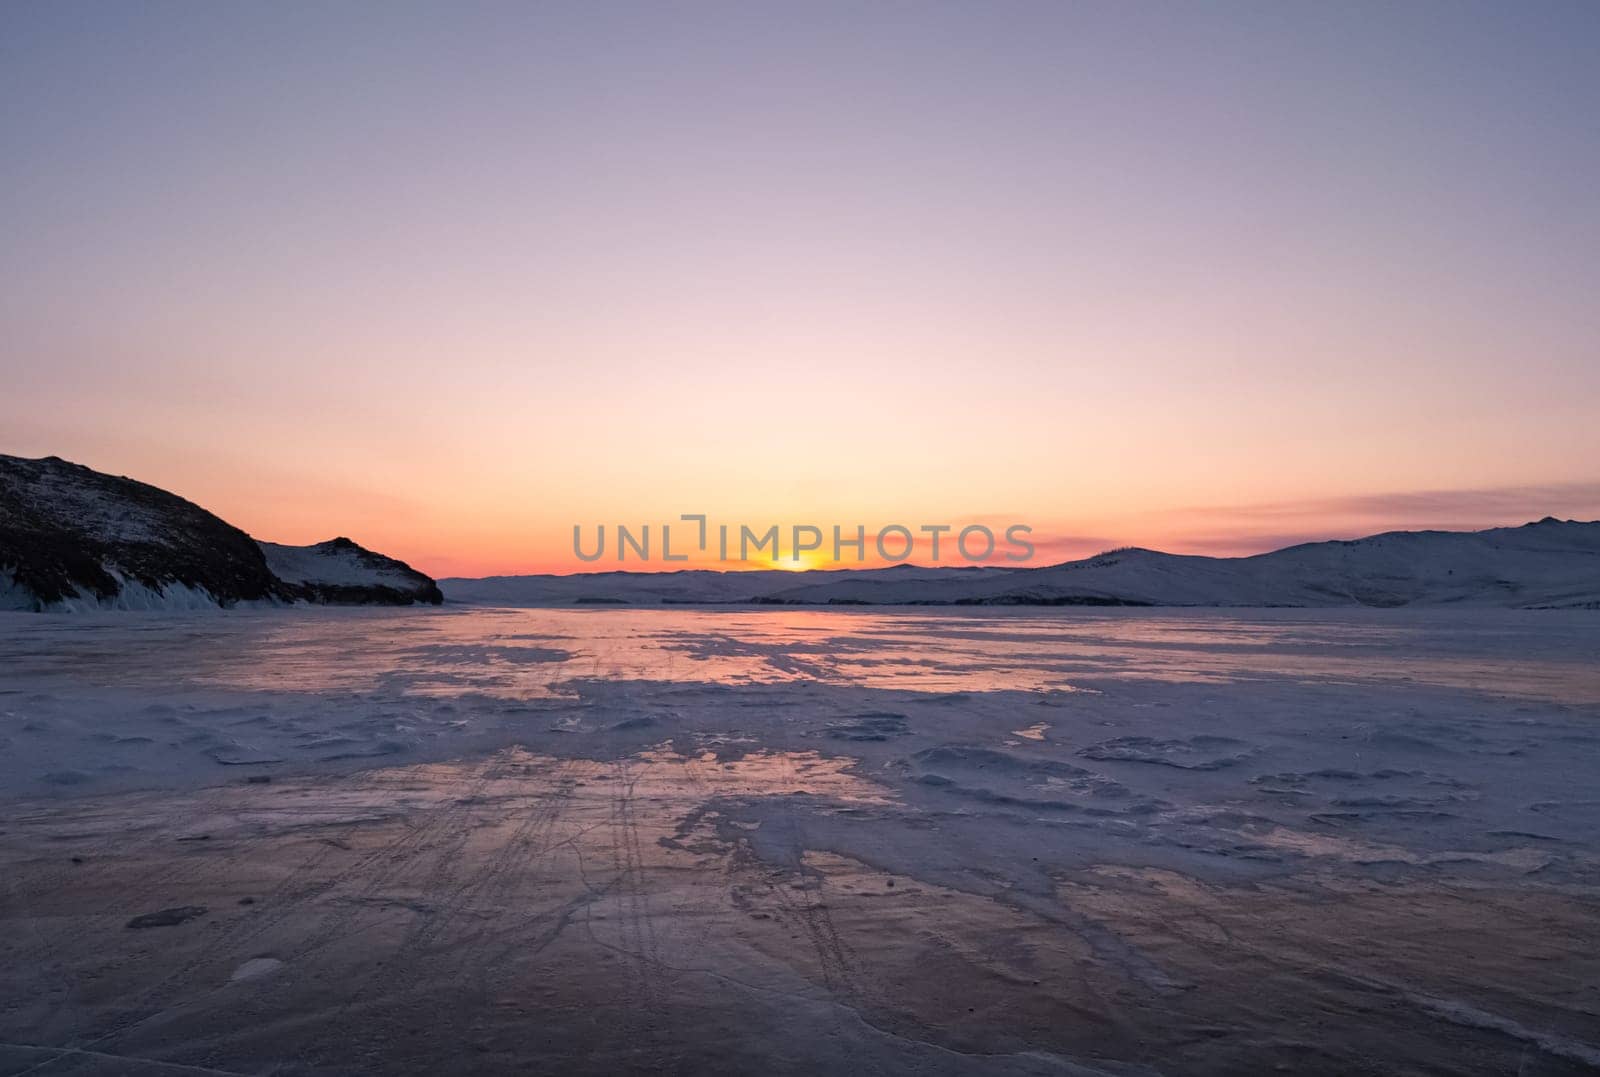 Snowy cracky ice of lake Baikal and the rocky island. Winter landscape of frozen Baikal at beautiful lilac sunrise. Sun reflections on the ice. Popular tourist spot by Busker